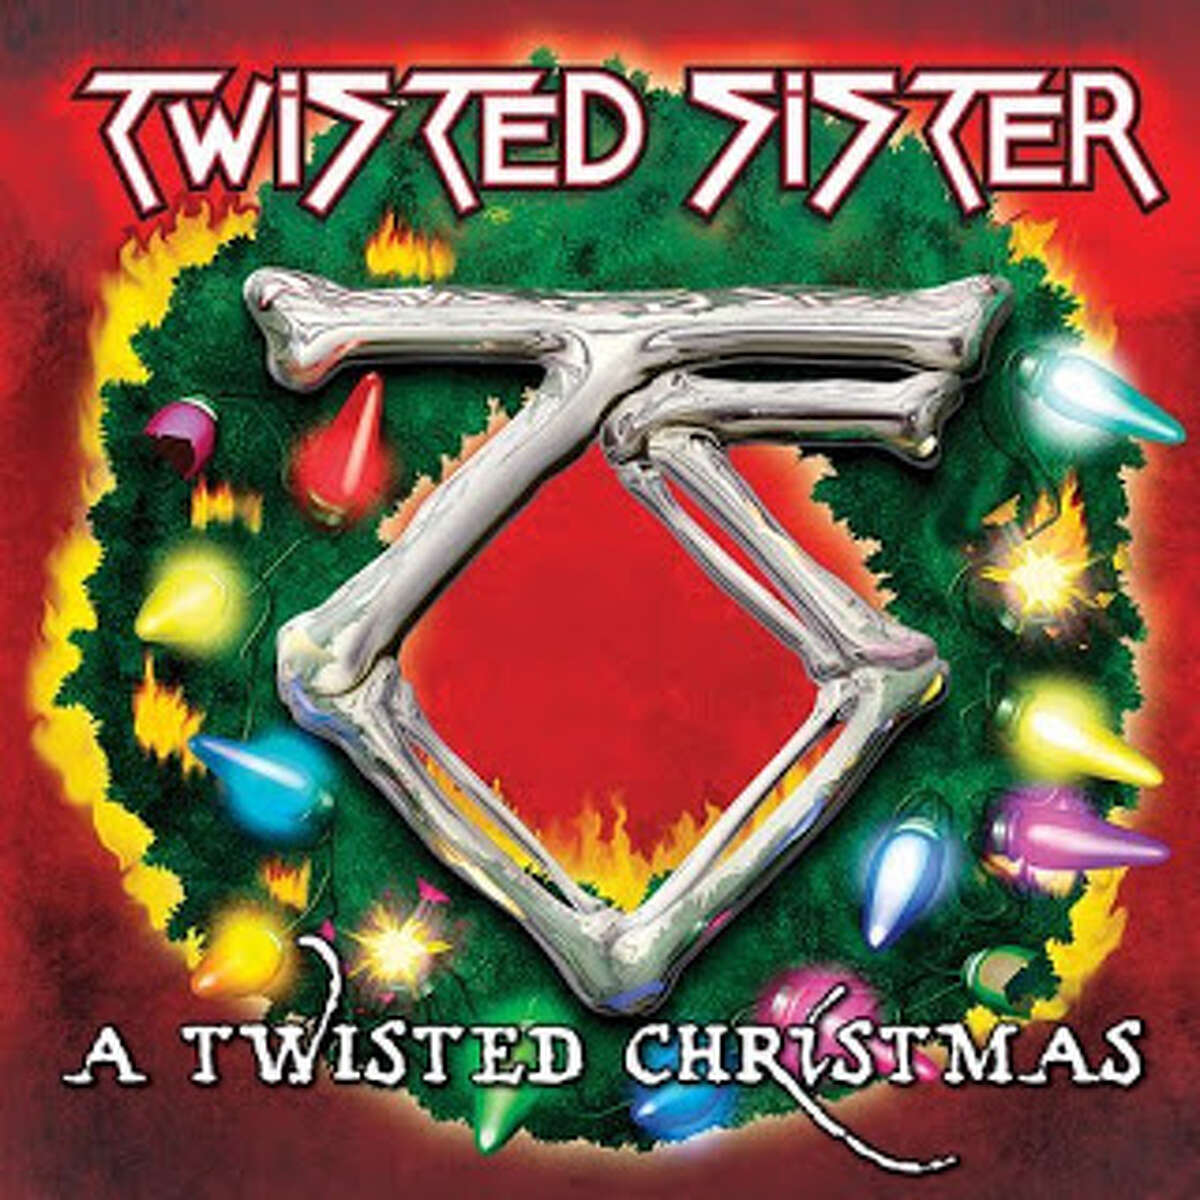 "A Twisted Christmas," Twisted Sister (2010)